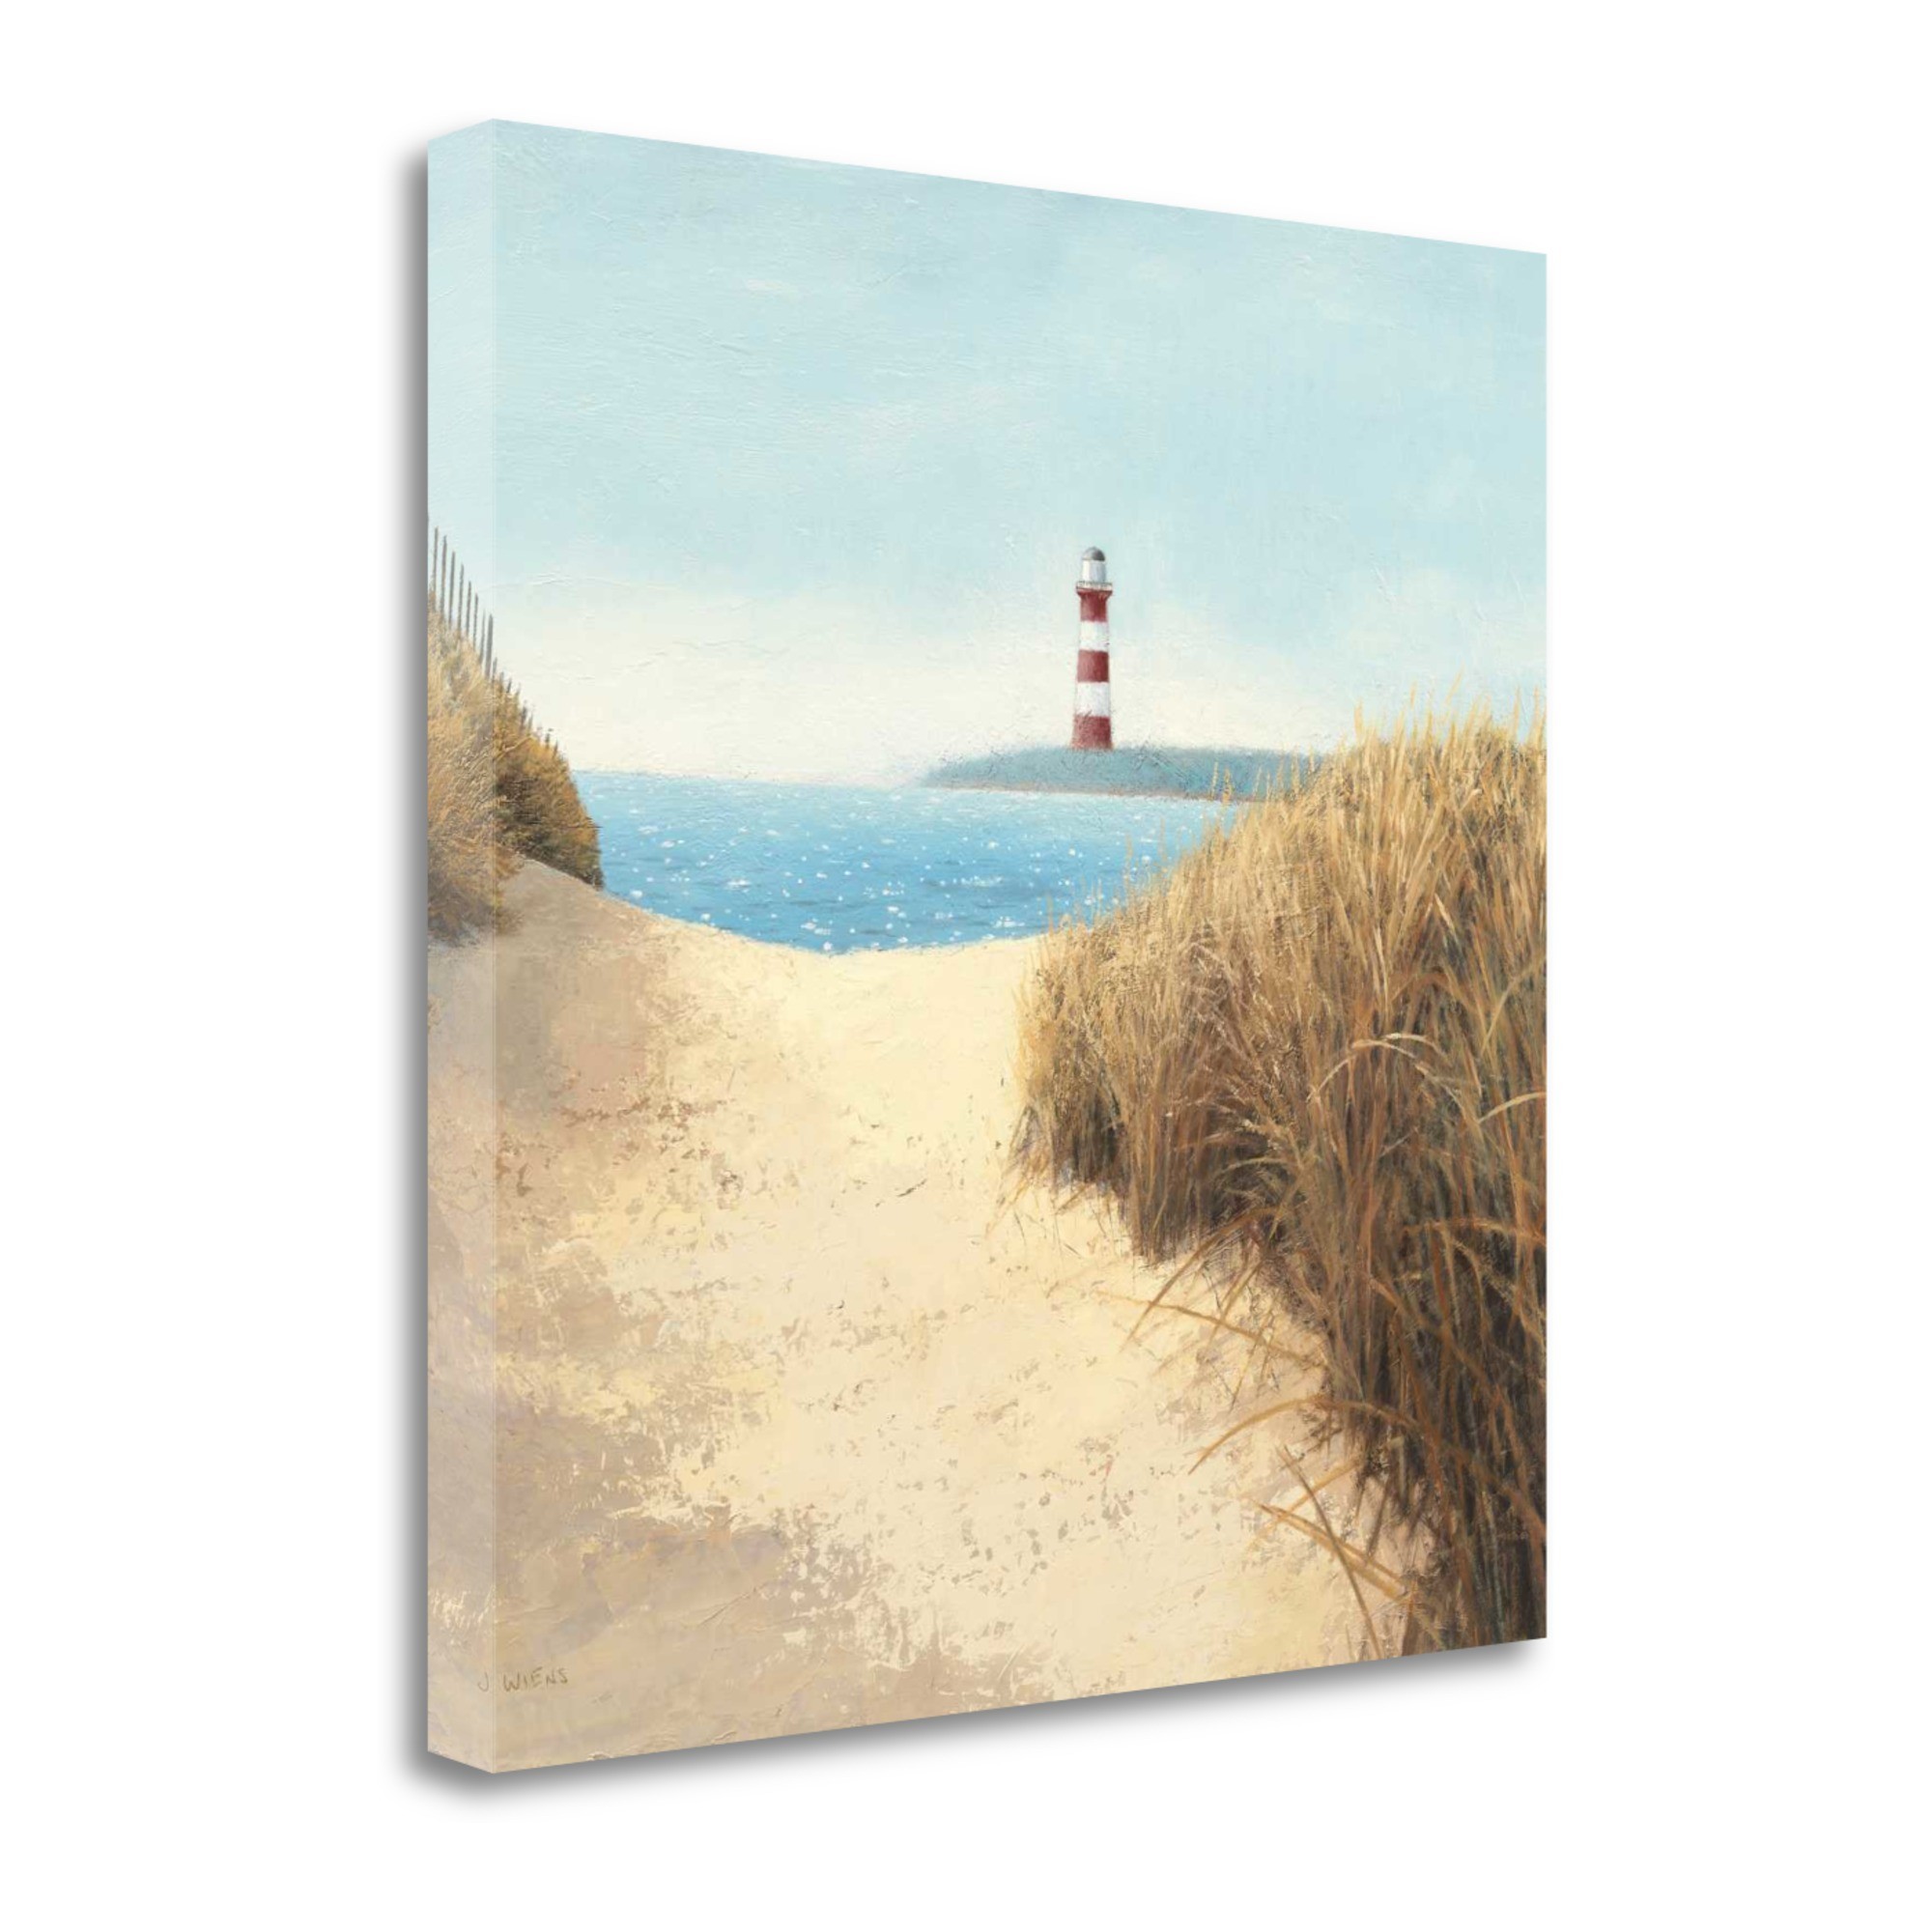 18" Sweet Beach Pathway Giclee Print on Gallery Wrap Canvas Wall Art